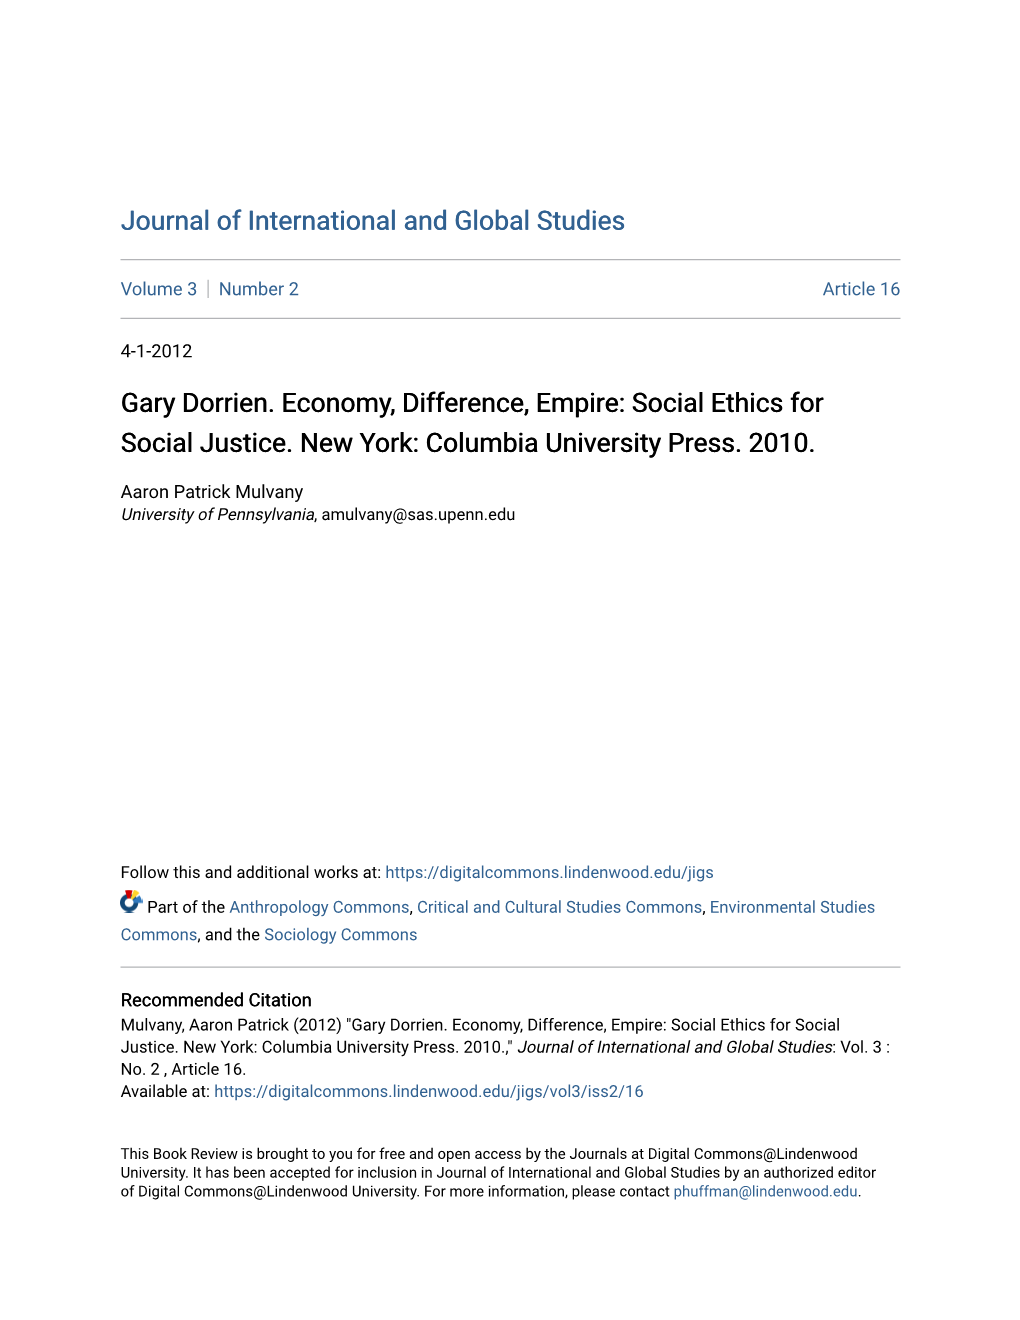 Gary Dorrien. Economy, Difference, Empire: Social Ethics for Social Justice